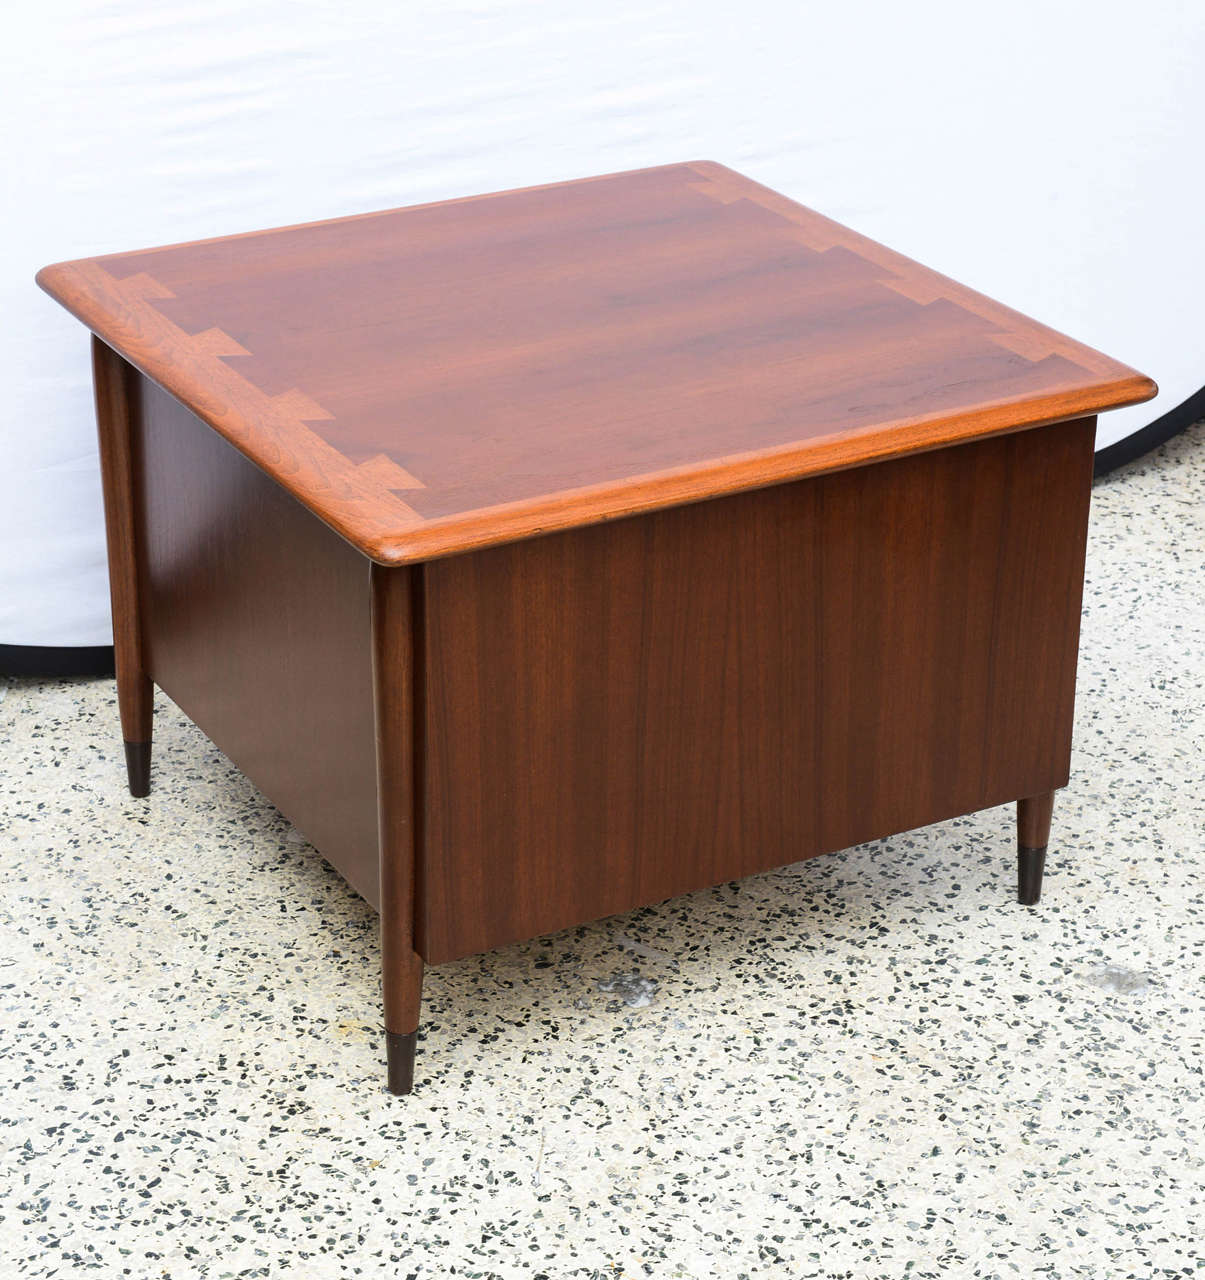 Mid-20th Century Inlaid Lane End Tables with Double Doors from Acclaim Series, USA 1960s